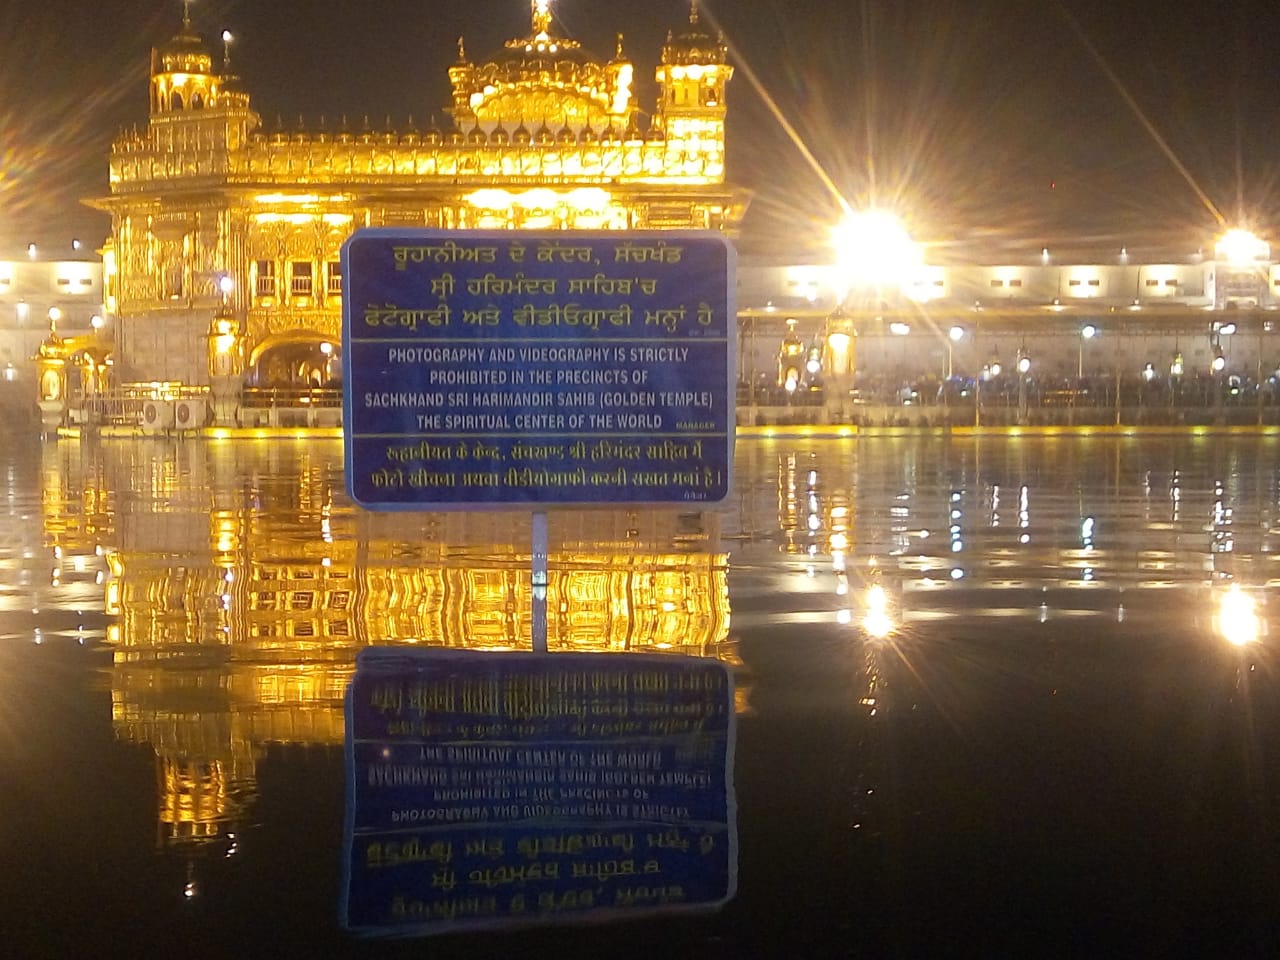 SGPC bans Photography and Videography at Golden Temple premises